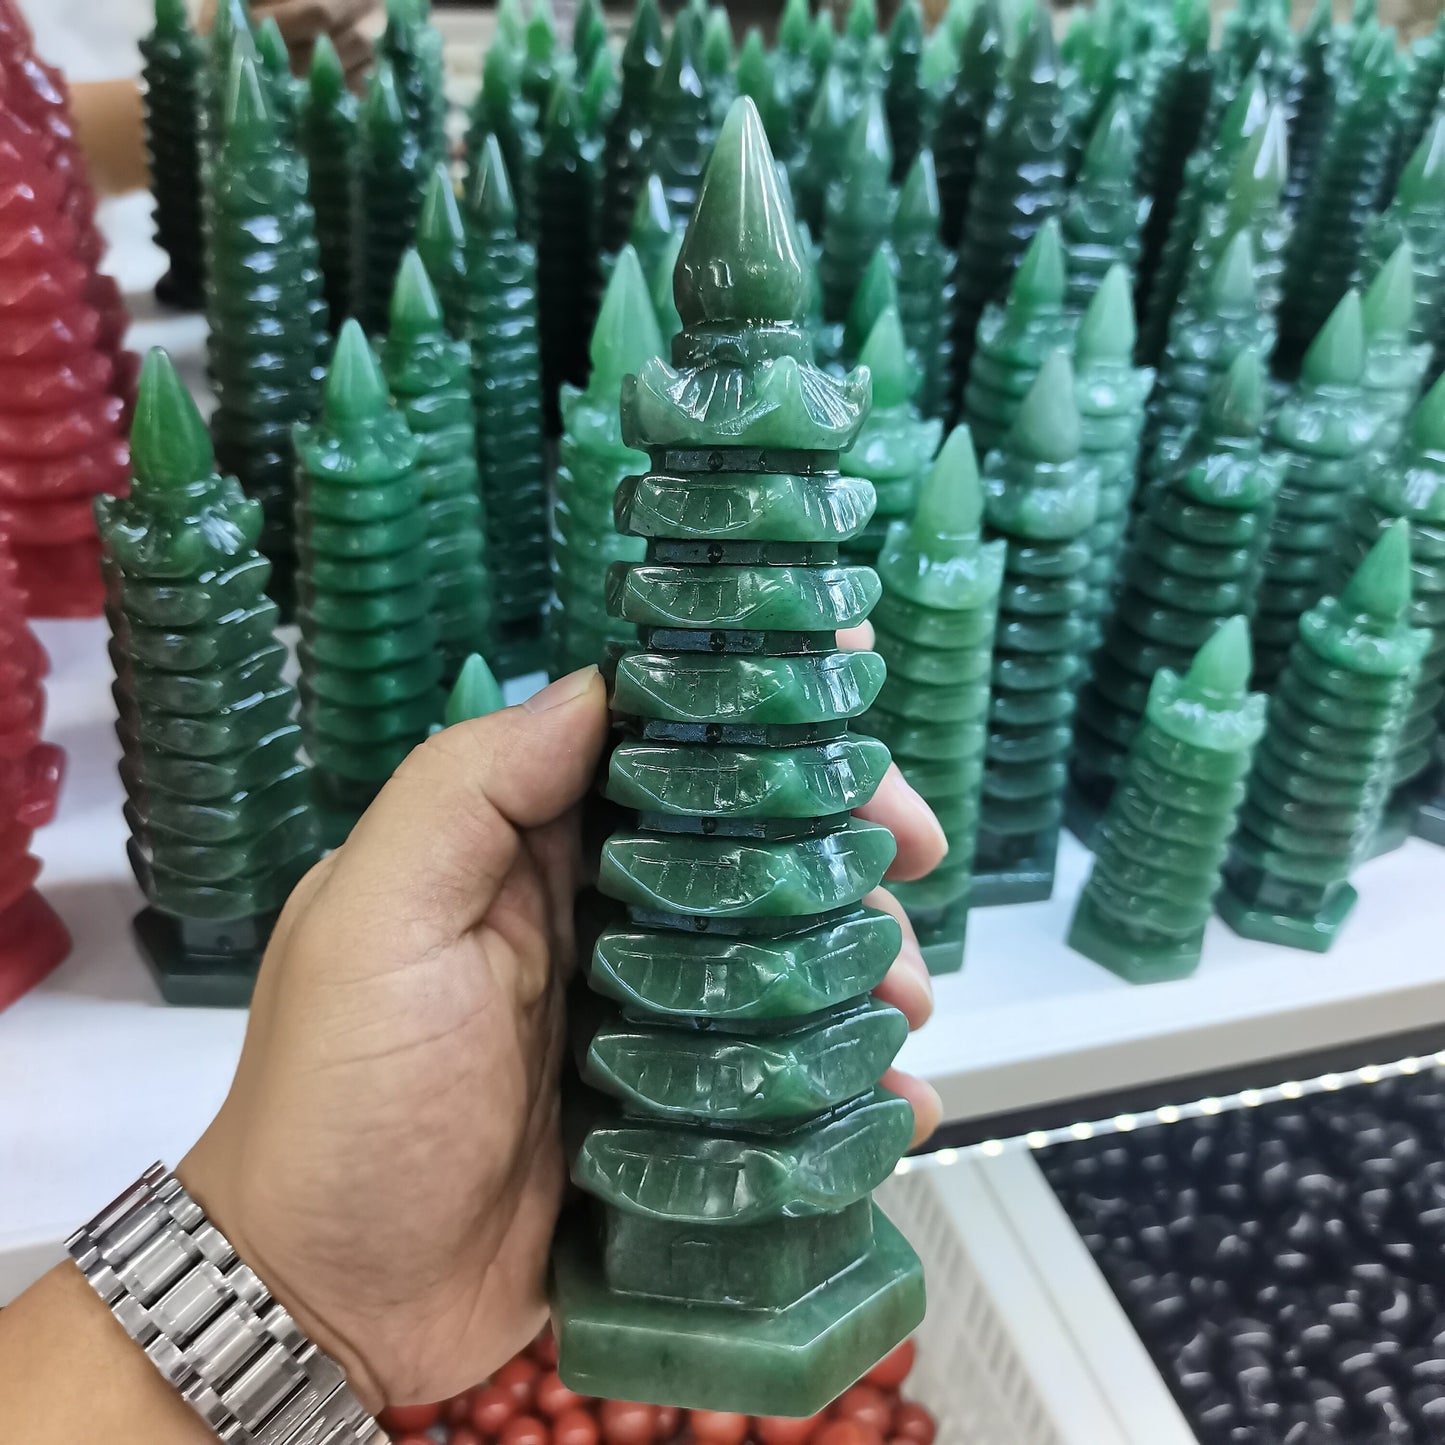 20cm Dongling Jade Pagoda Point Carved Stone for Energy and Chakra Healing - Natural Wenchang Tower Crystal